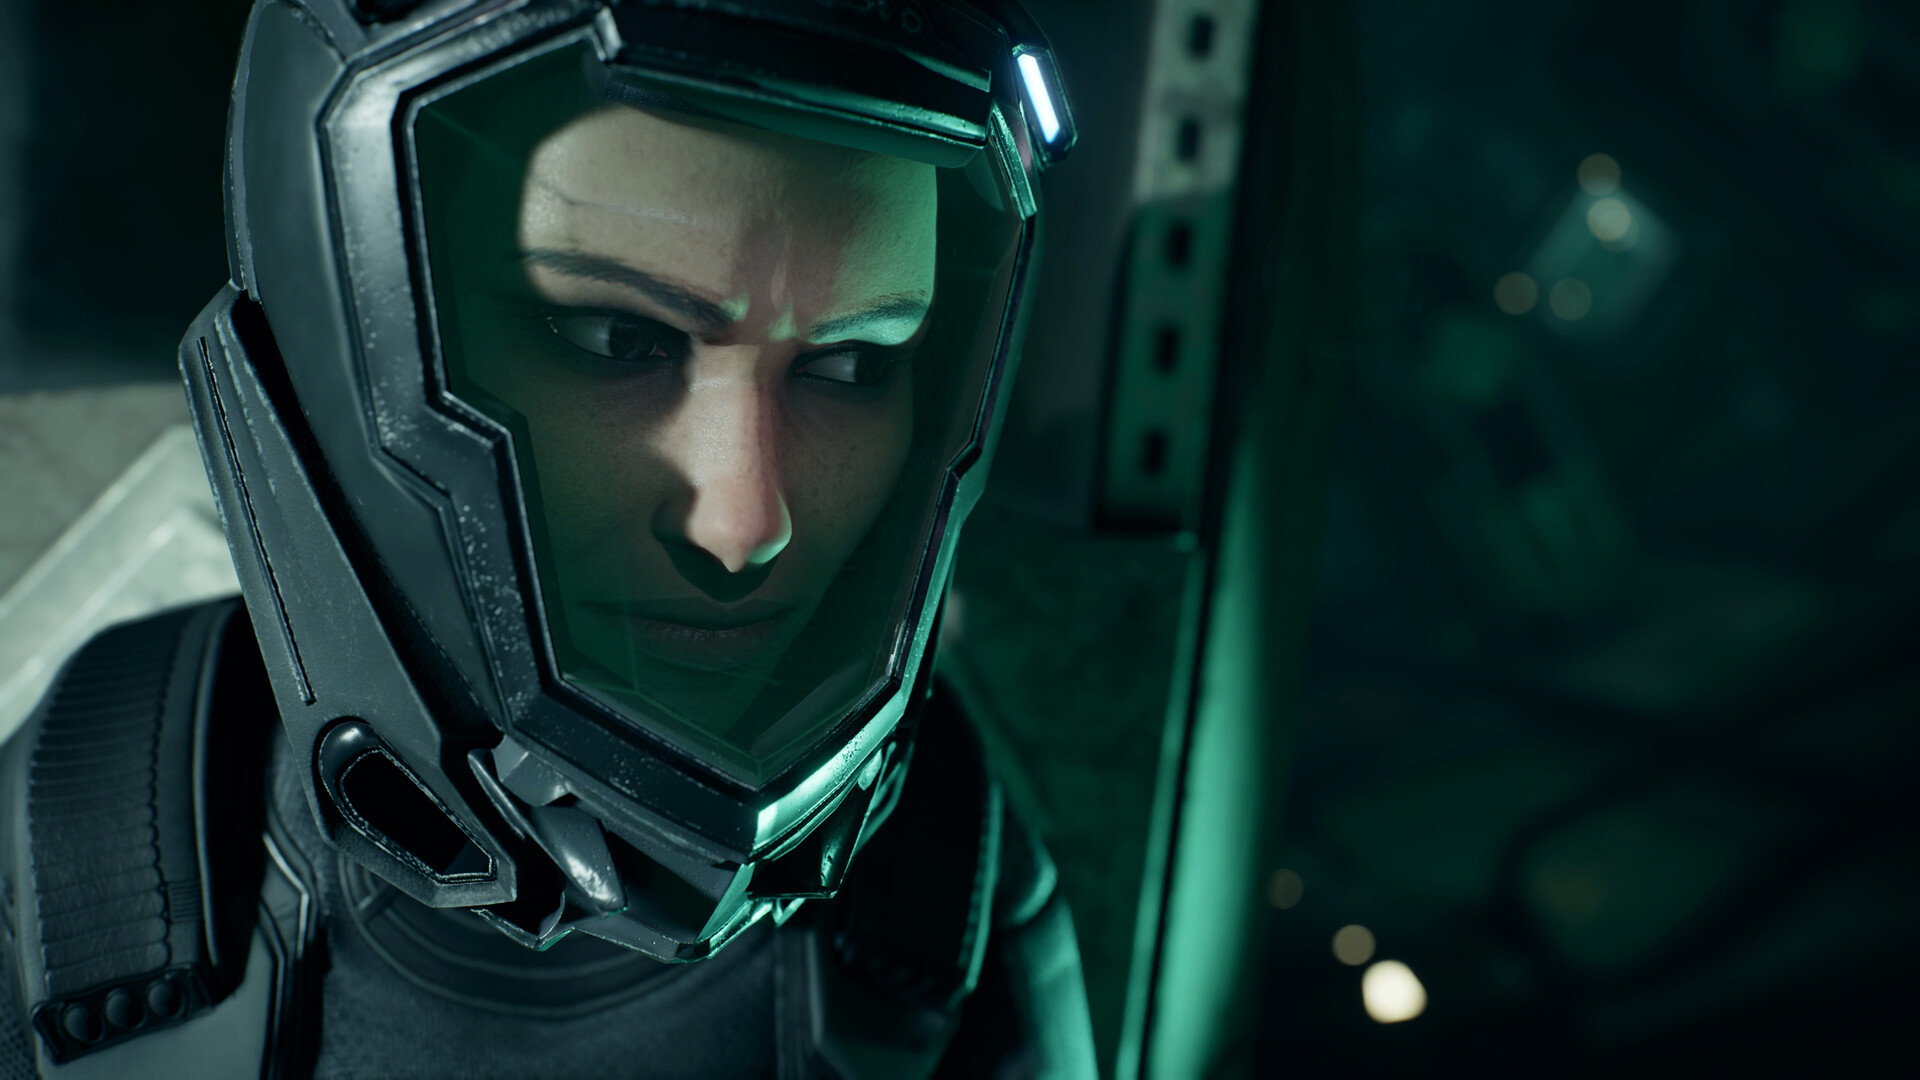 The Expanse: A Telltale Series (2023)  Price, Review, System Requirements,  Download